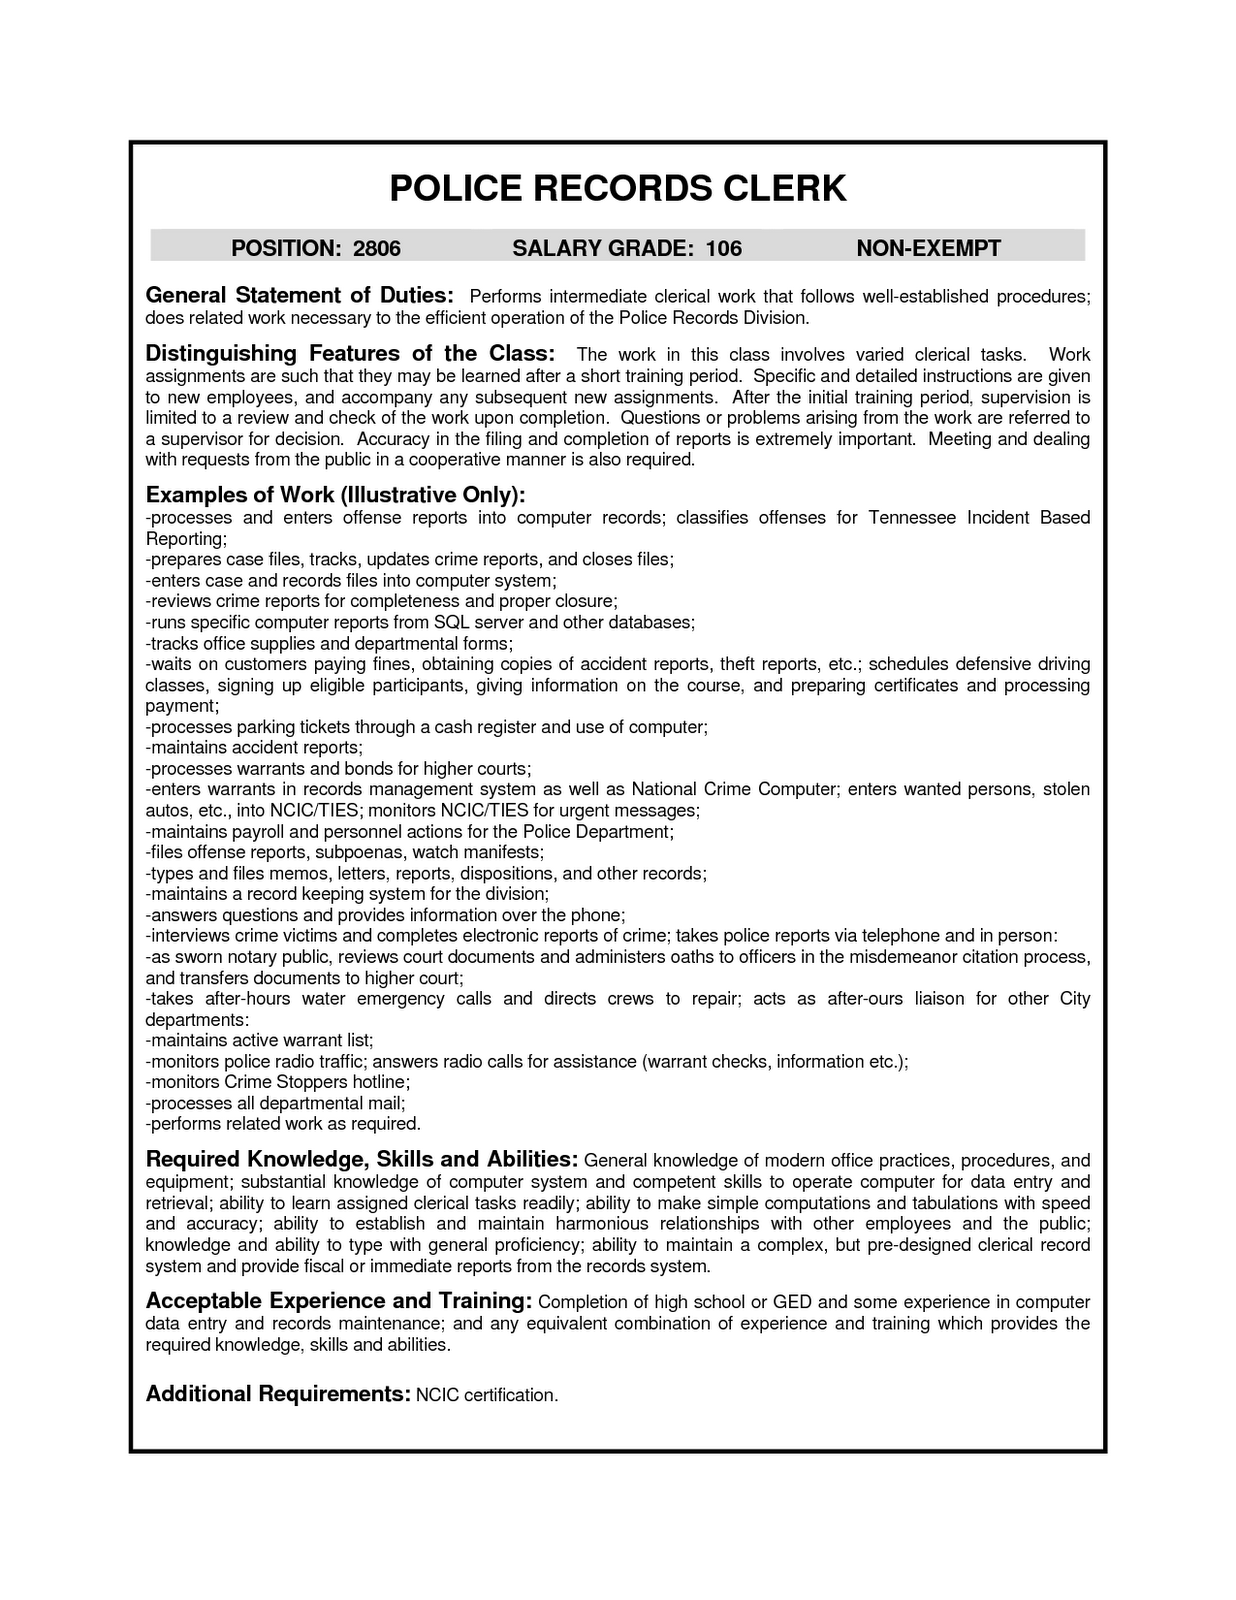 Example resume for clerical job